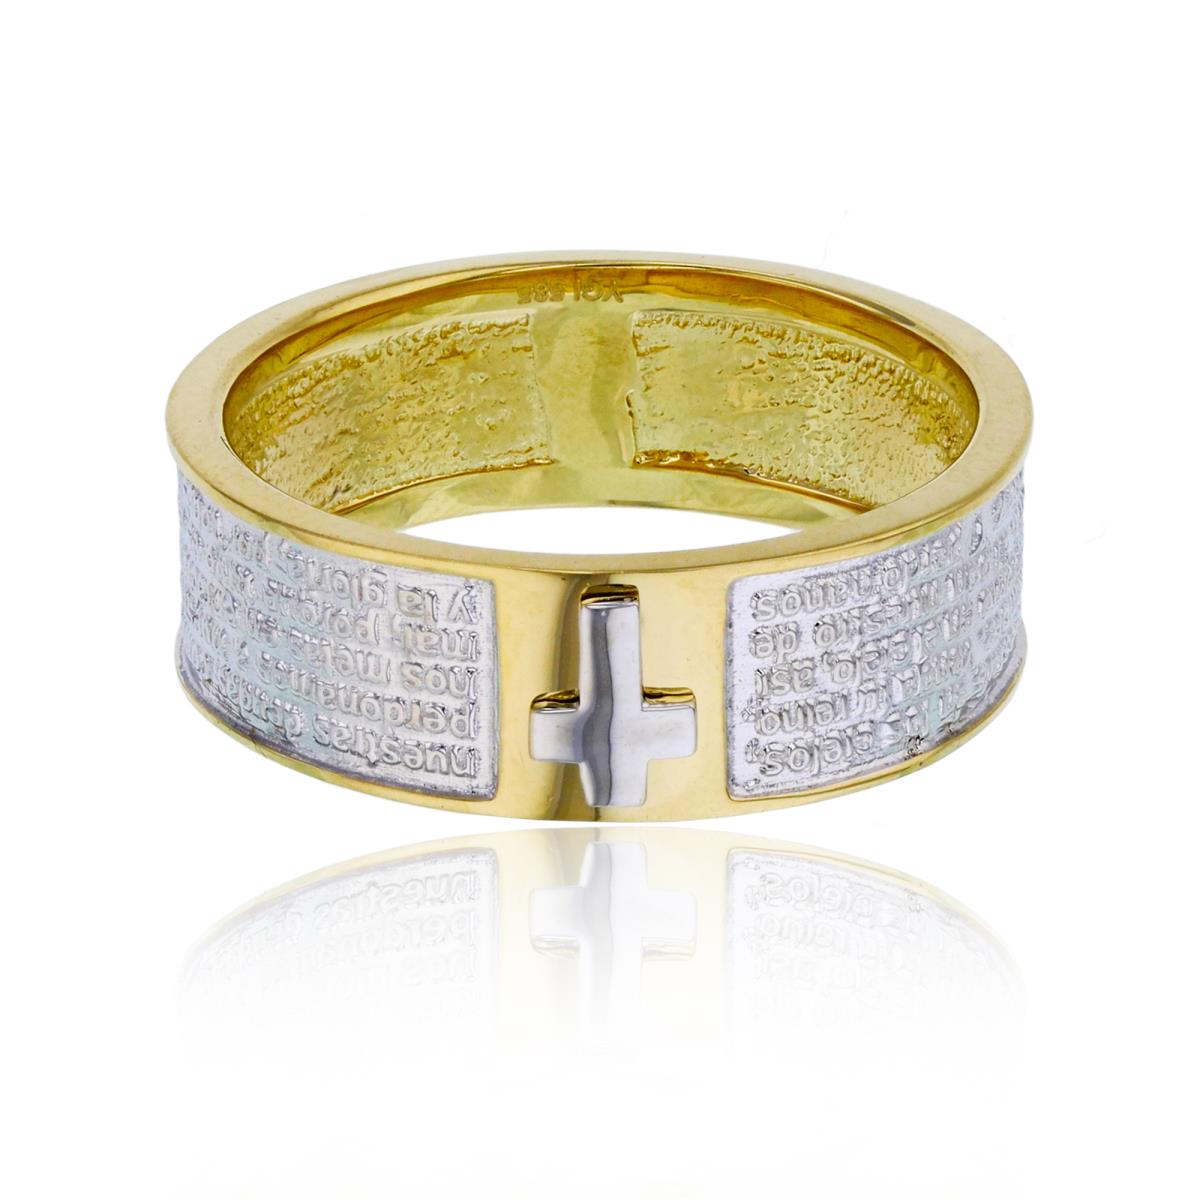 14K Yellow & White Gold 8mm Our Father Prayer Engraved Band Ring